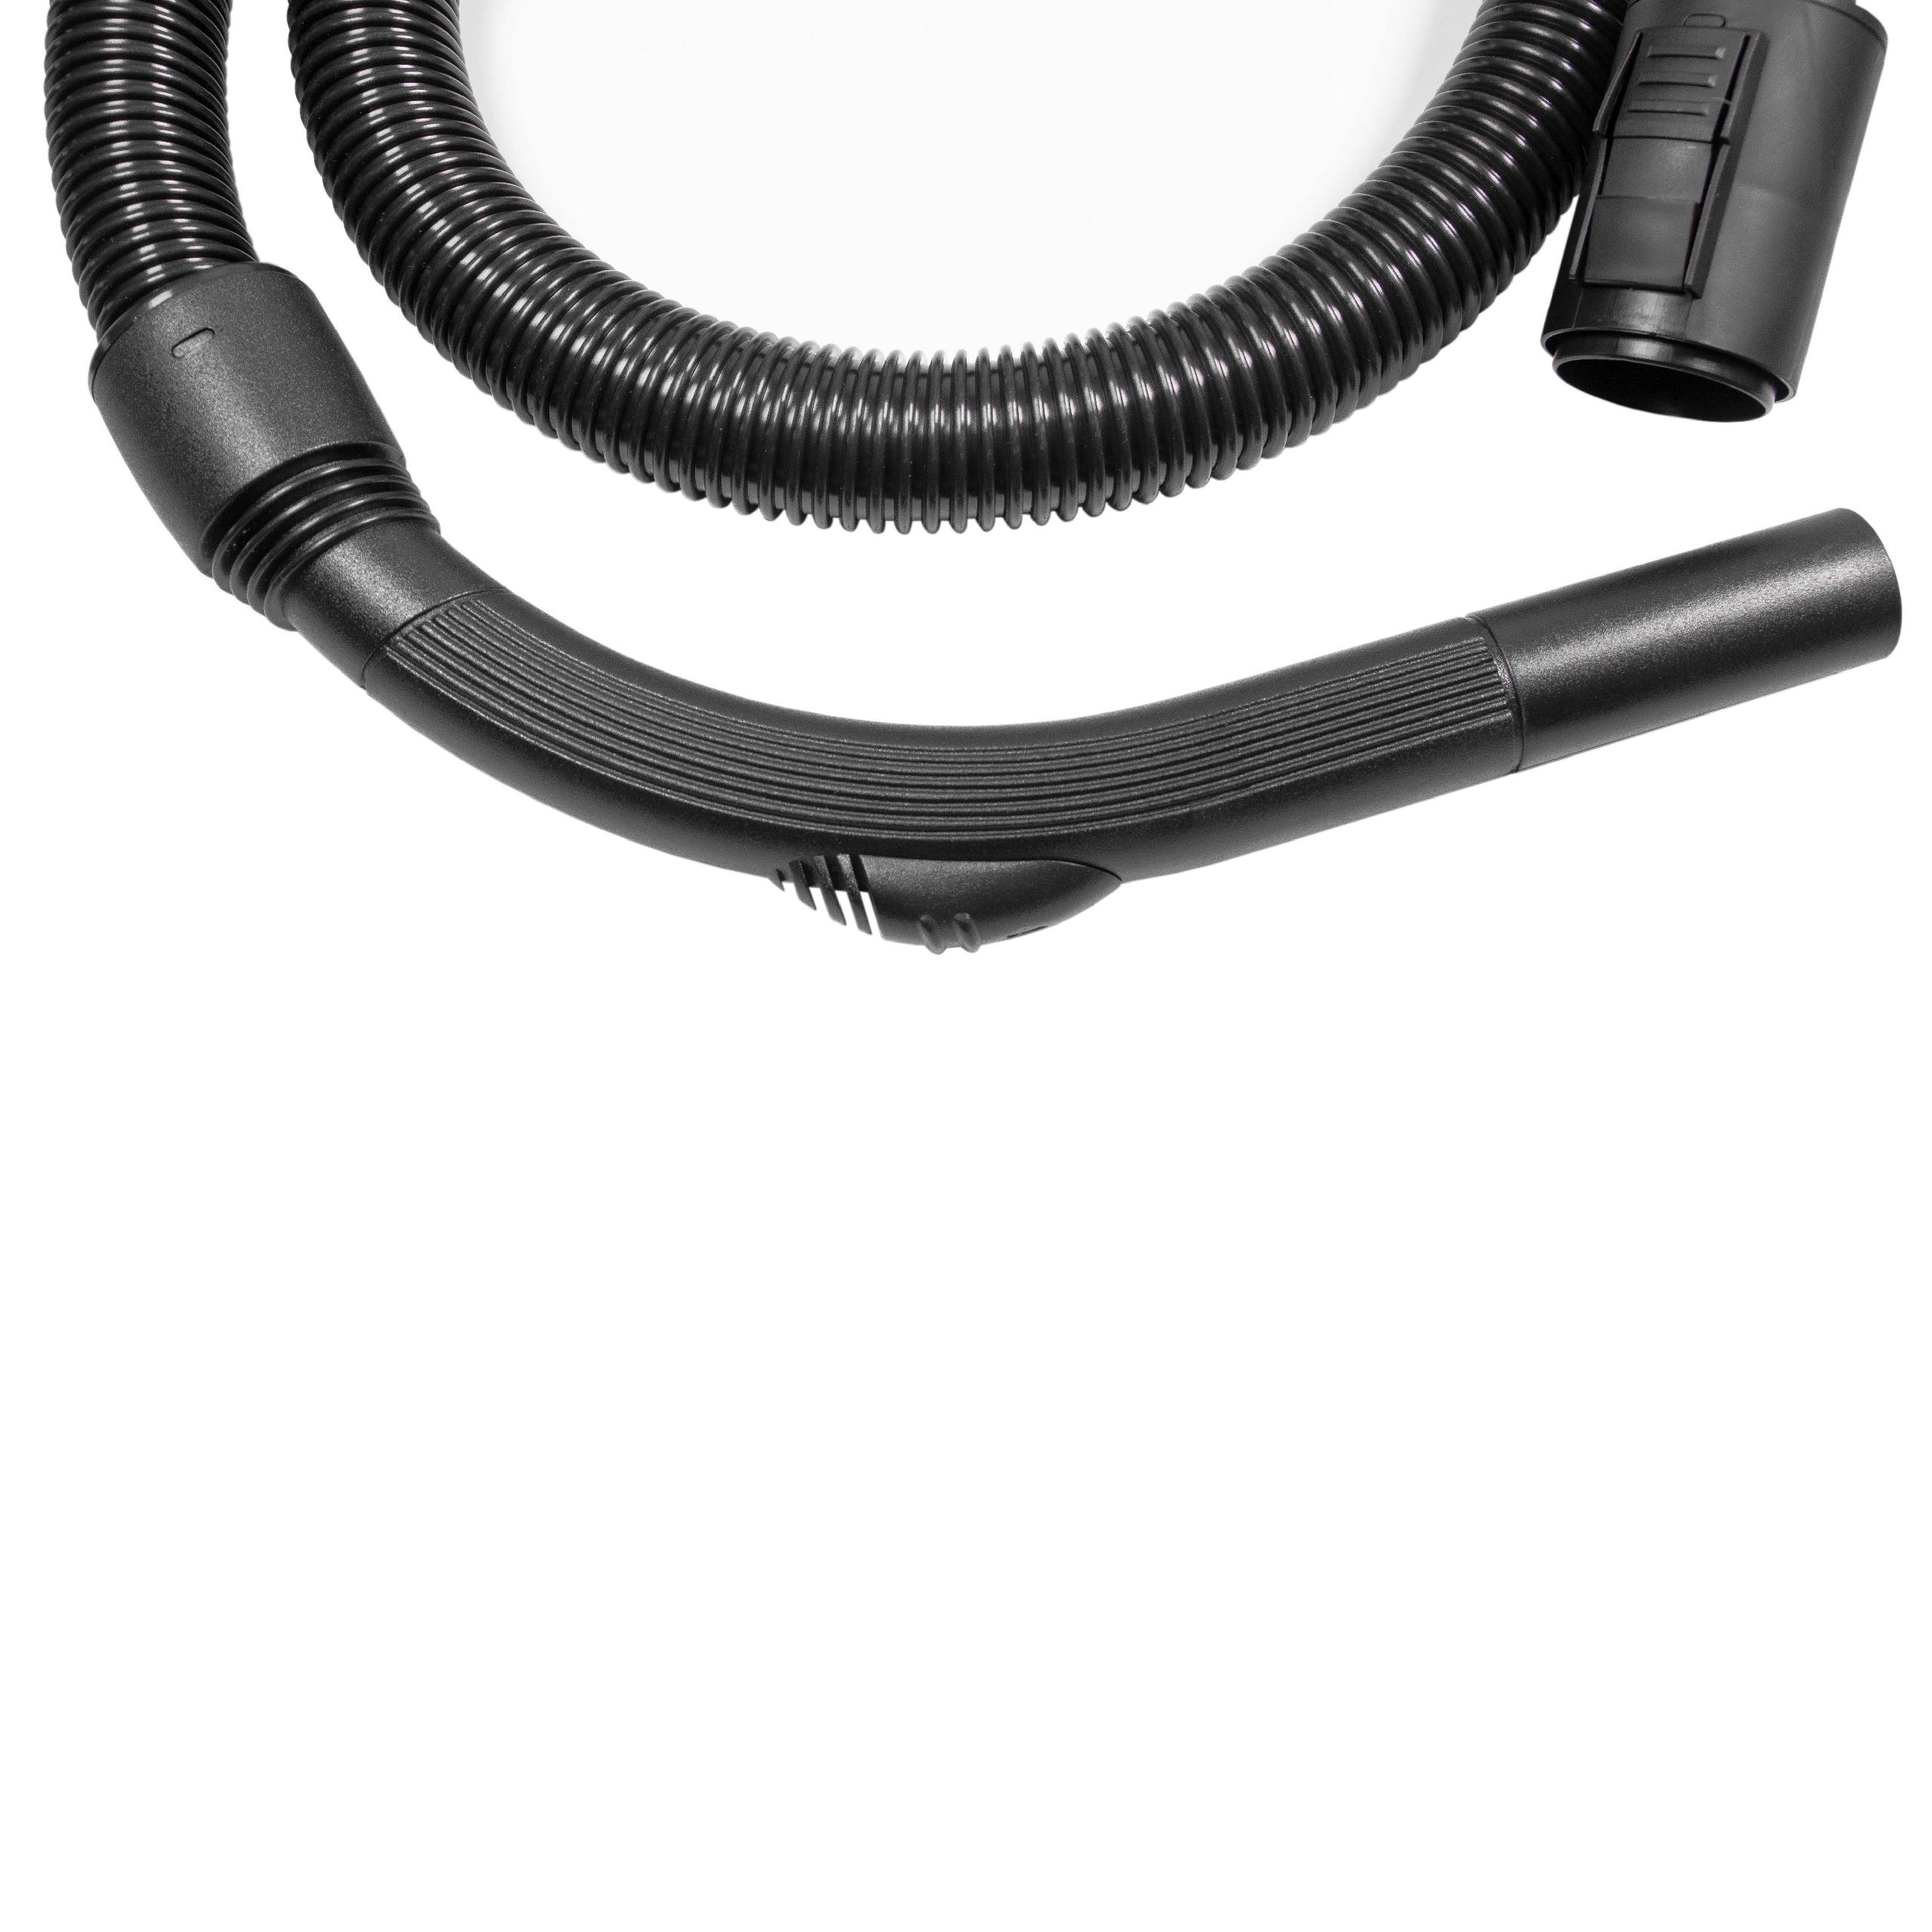 Hose as Replacement for Kärcher 1.629-101.0 etc. - 200 cm long (with Handle)